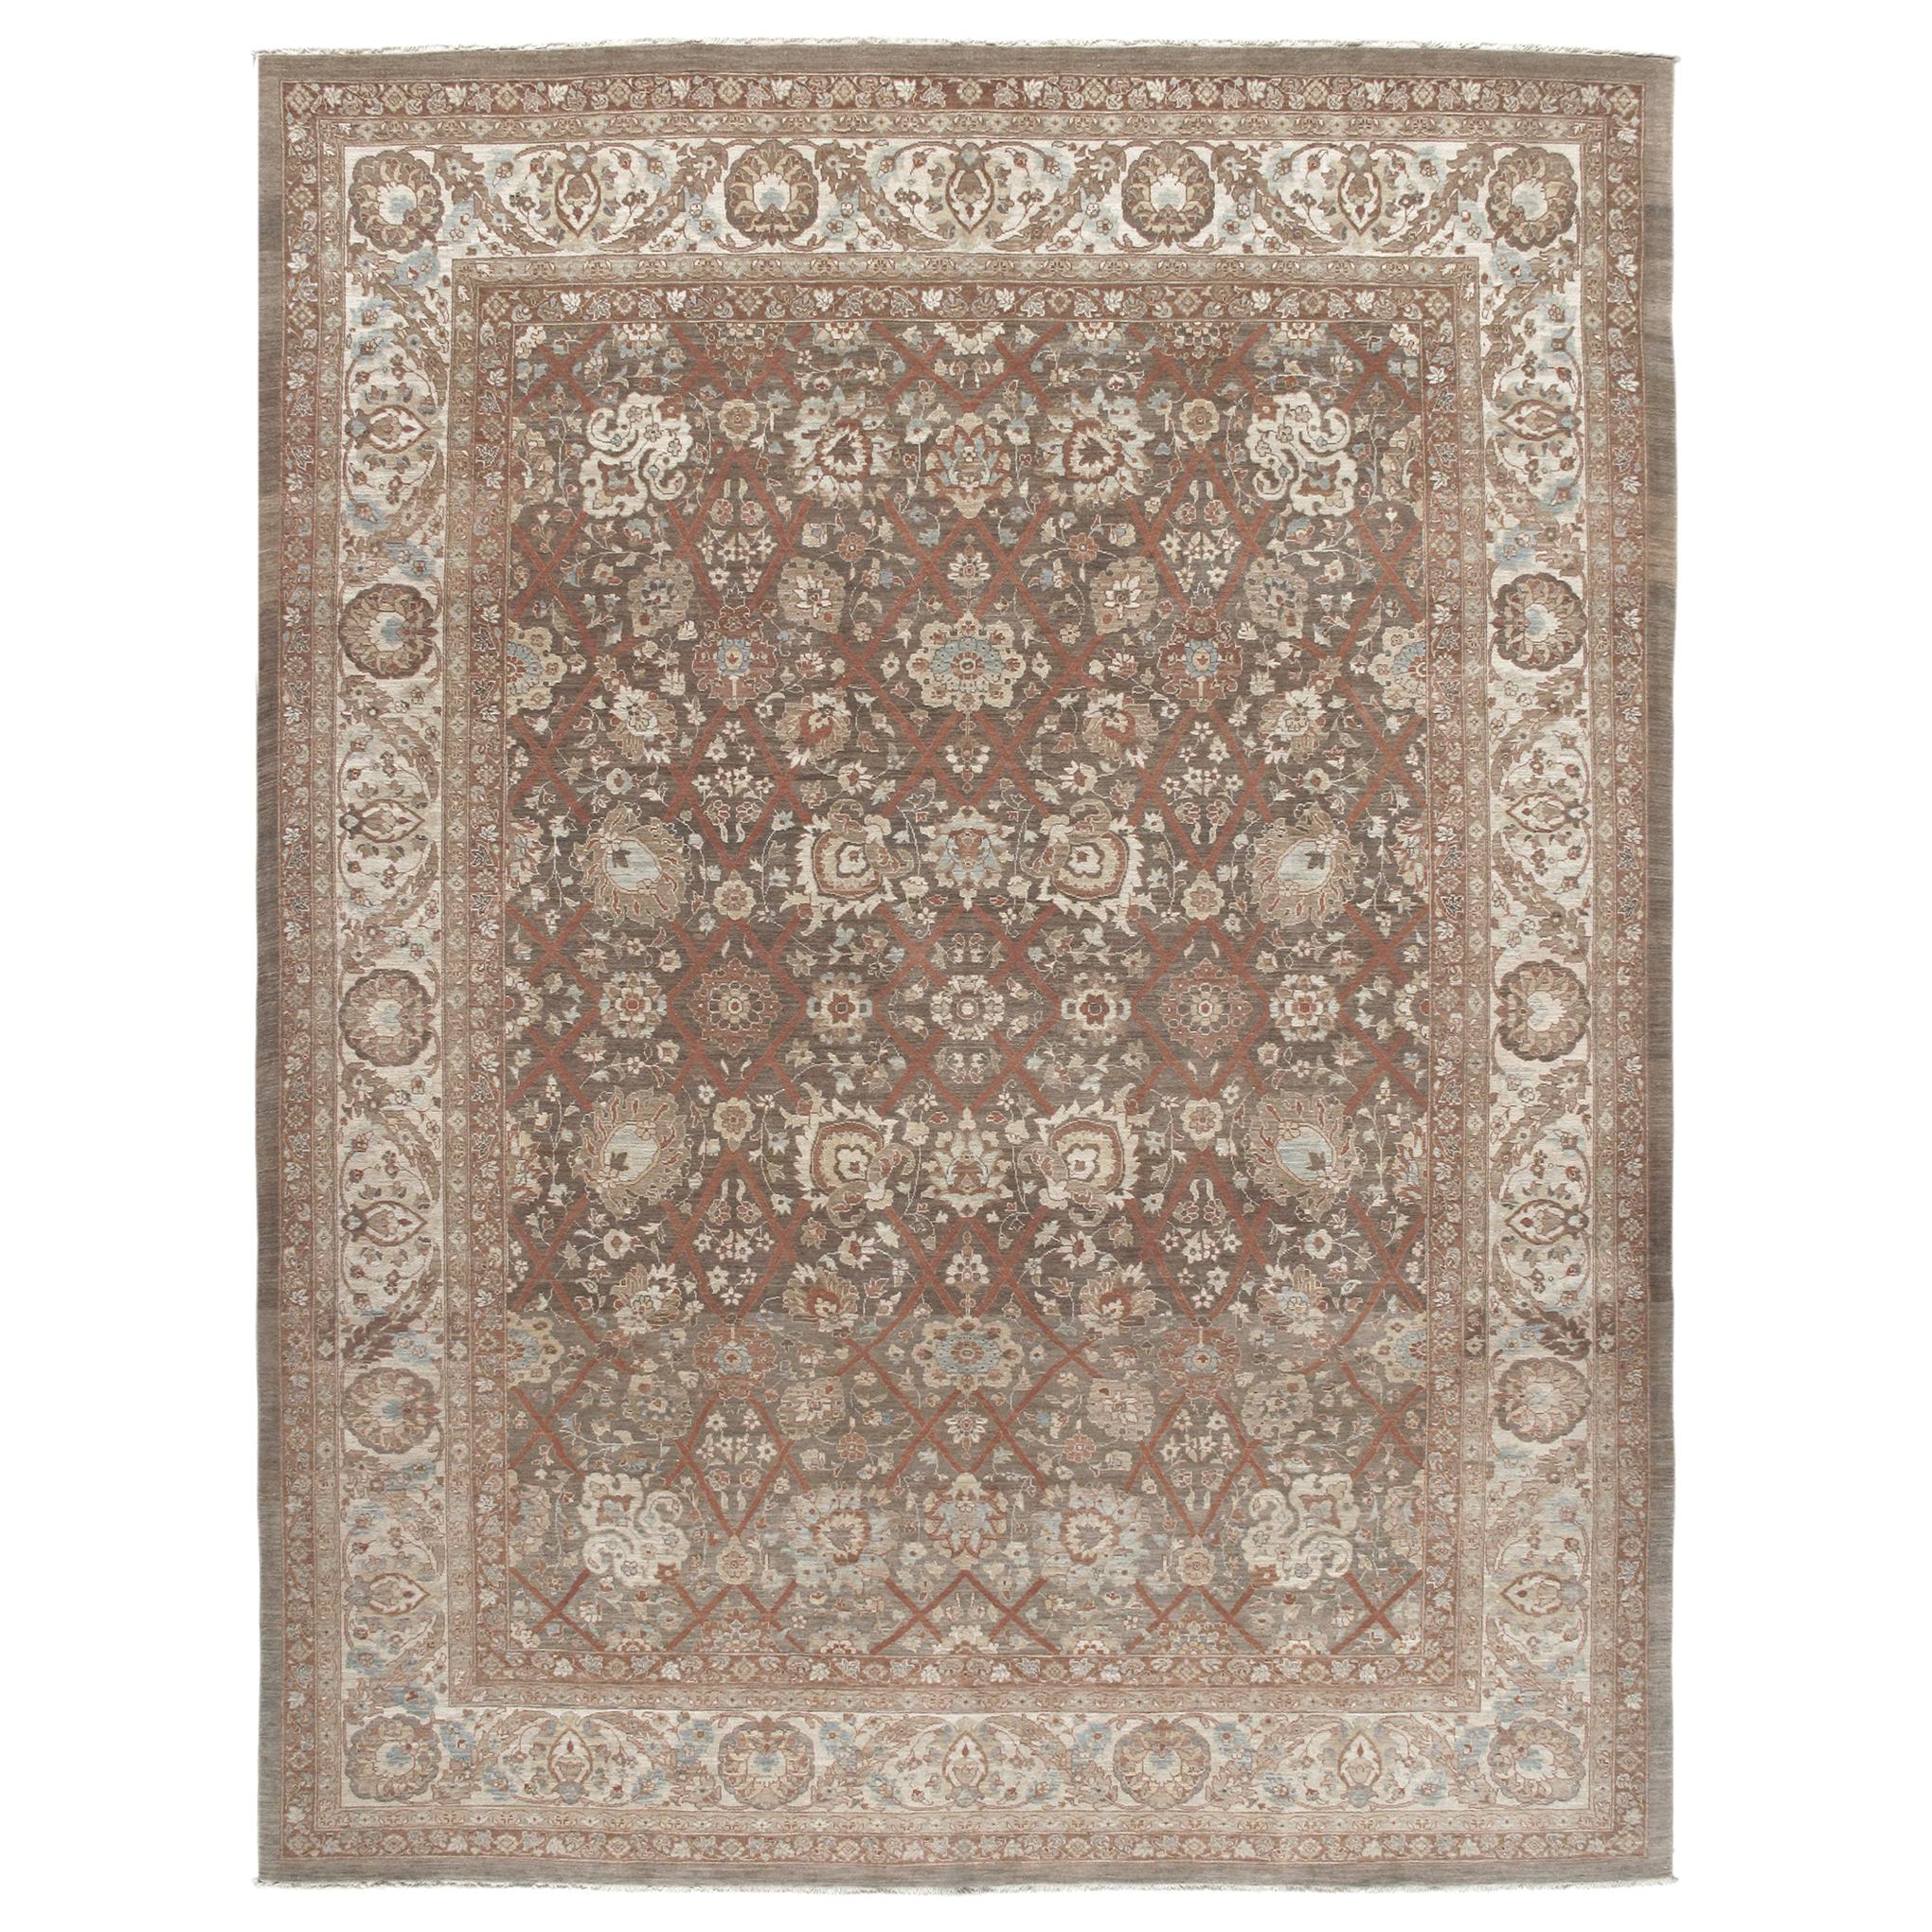 Persian Tabriz Hadji Jalili Style Handknotted Rug in Ivory, Brown and Rust Tones